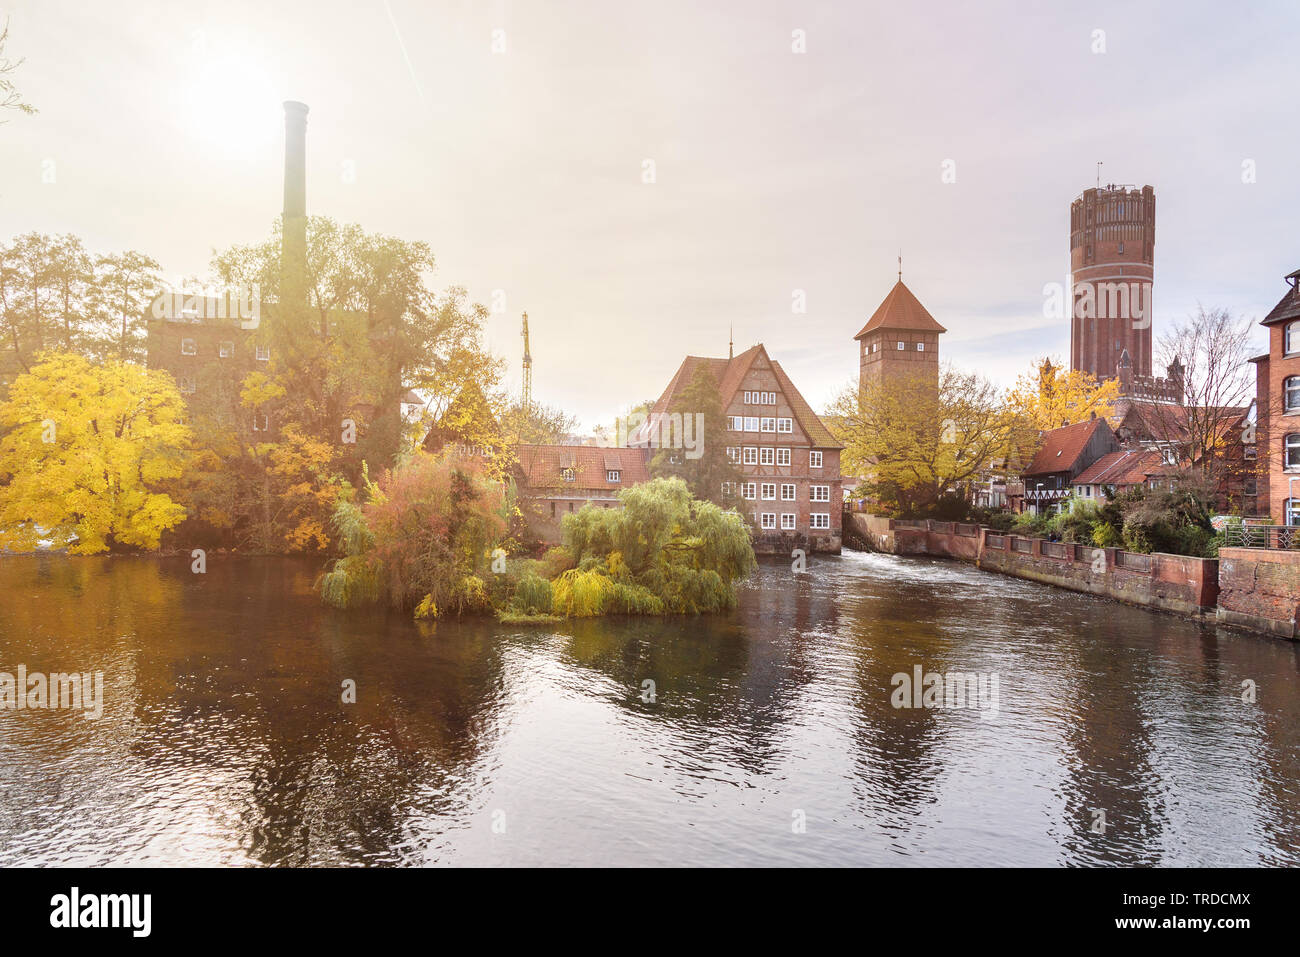 Ratsmuhle or old water mill and Wasserturm or water tower on Ilmenau river at morning in Luneburg. Germany Stock Photo